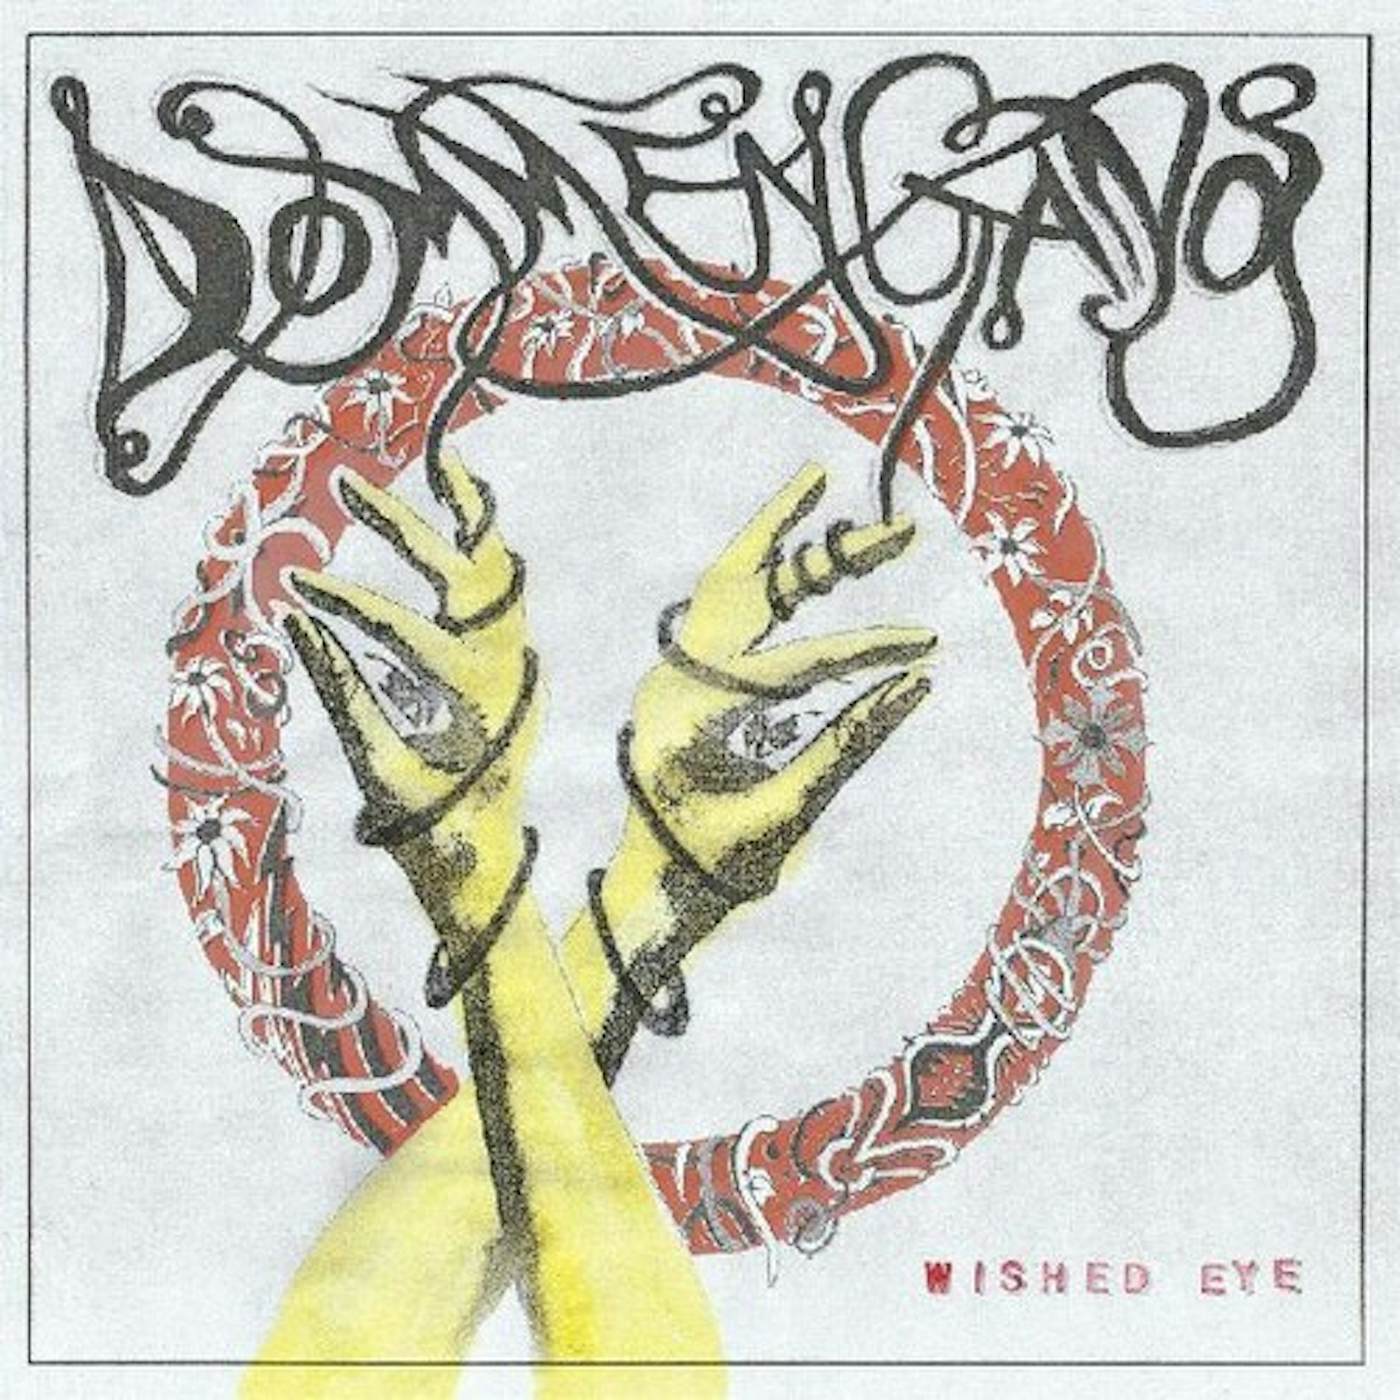 Dommengang Wished Eye Vinyl Record